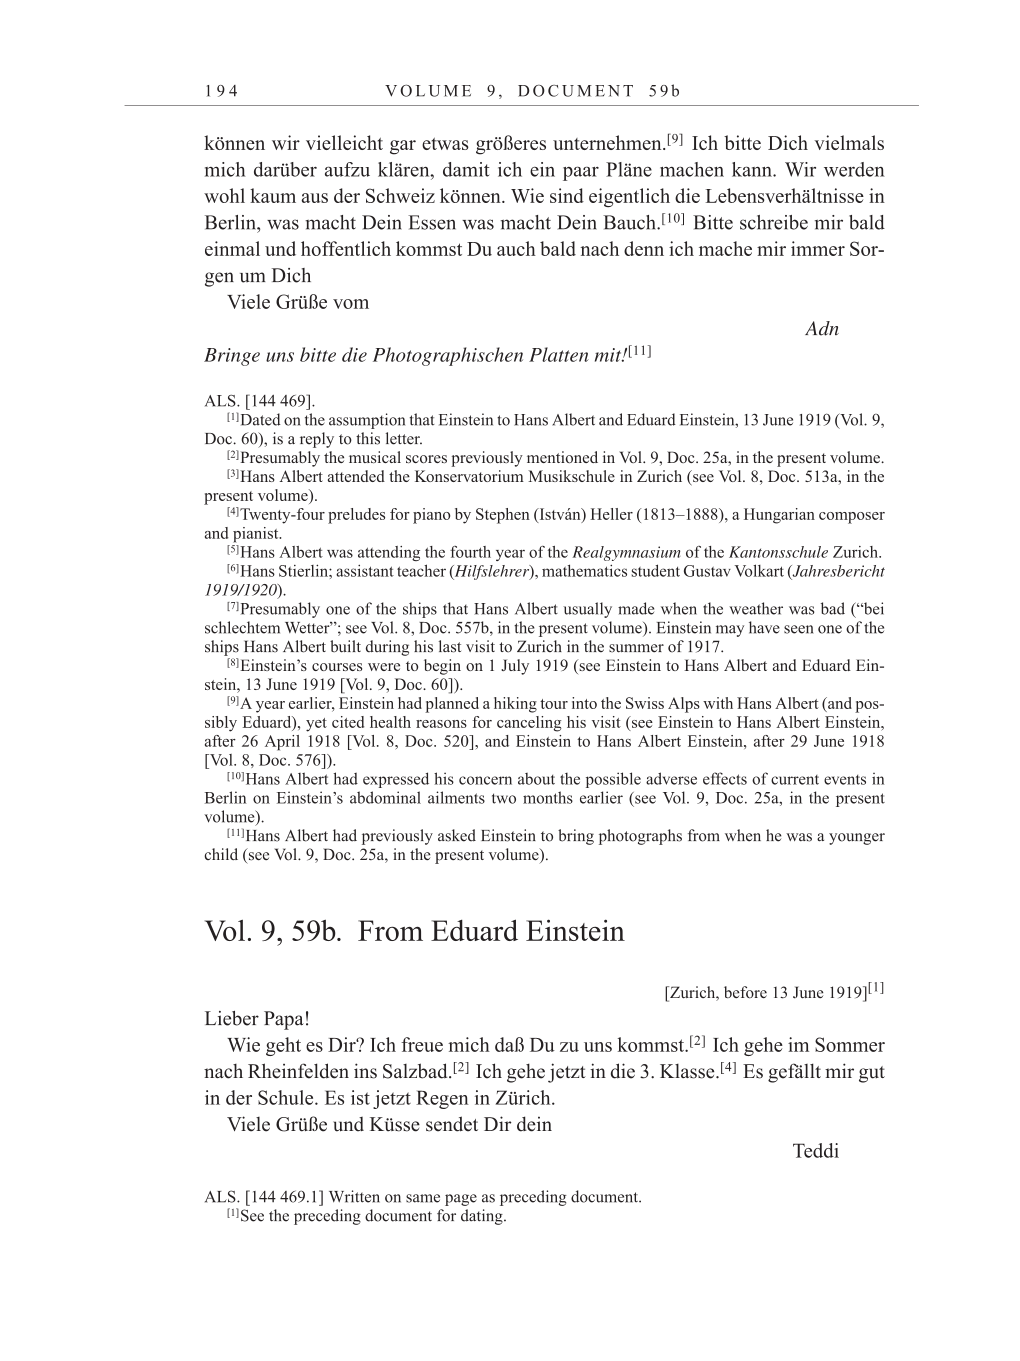 Volume 10: The Berlin Years: Correspondence May-December 1920 / Supplementary Correspondence 1909-1920 page 194